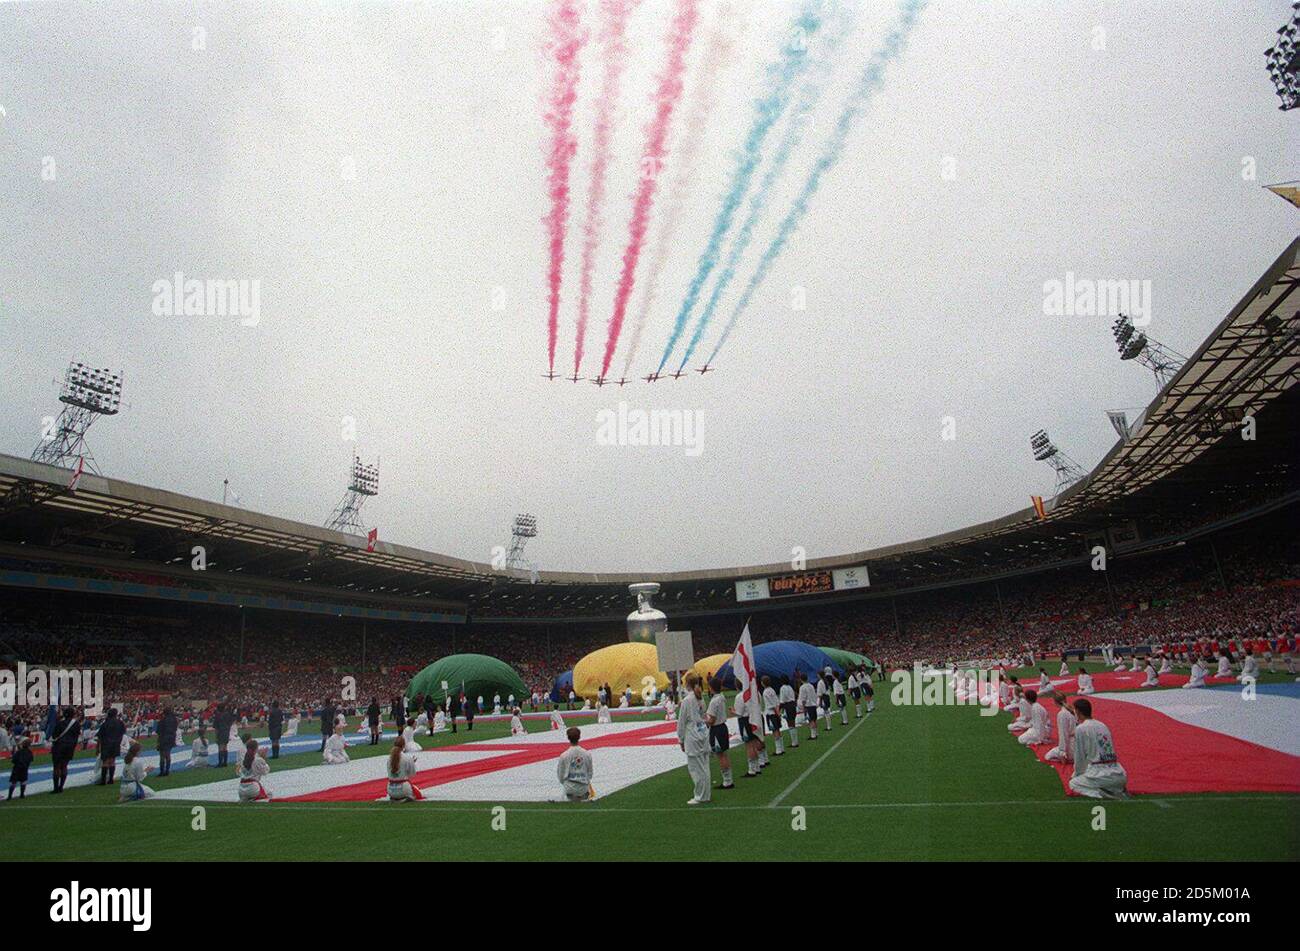 08-JUN-96 ... England v Switzerland at Wembley ... The Red Arrows fly past at the opening ceremony at Wembley ...  Stock Photo